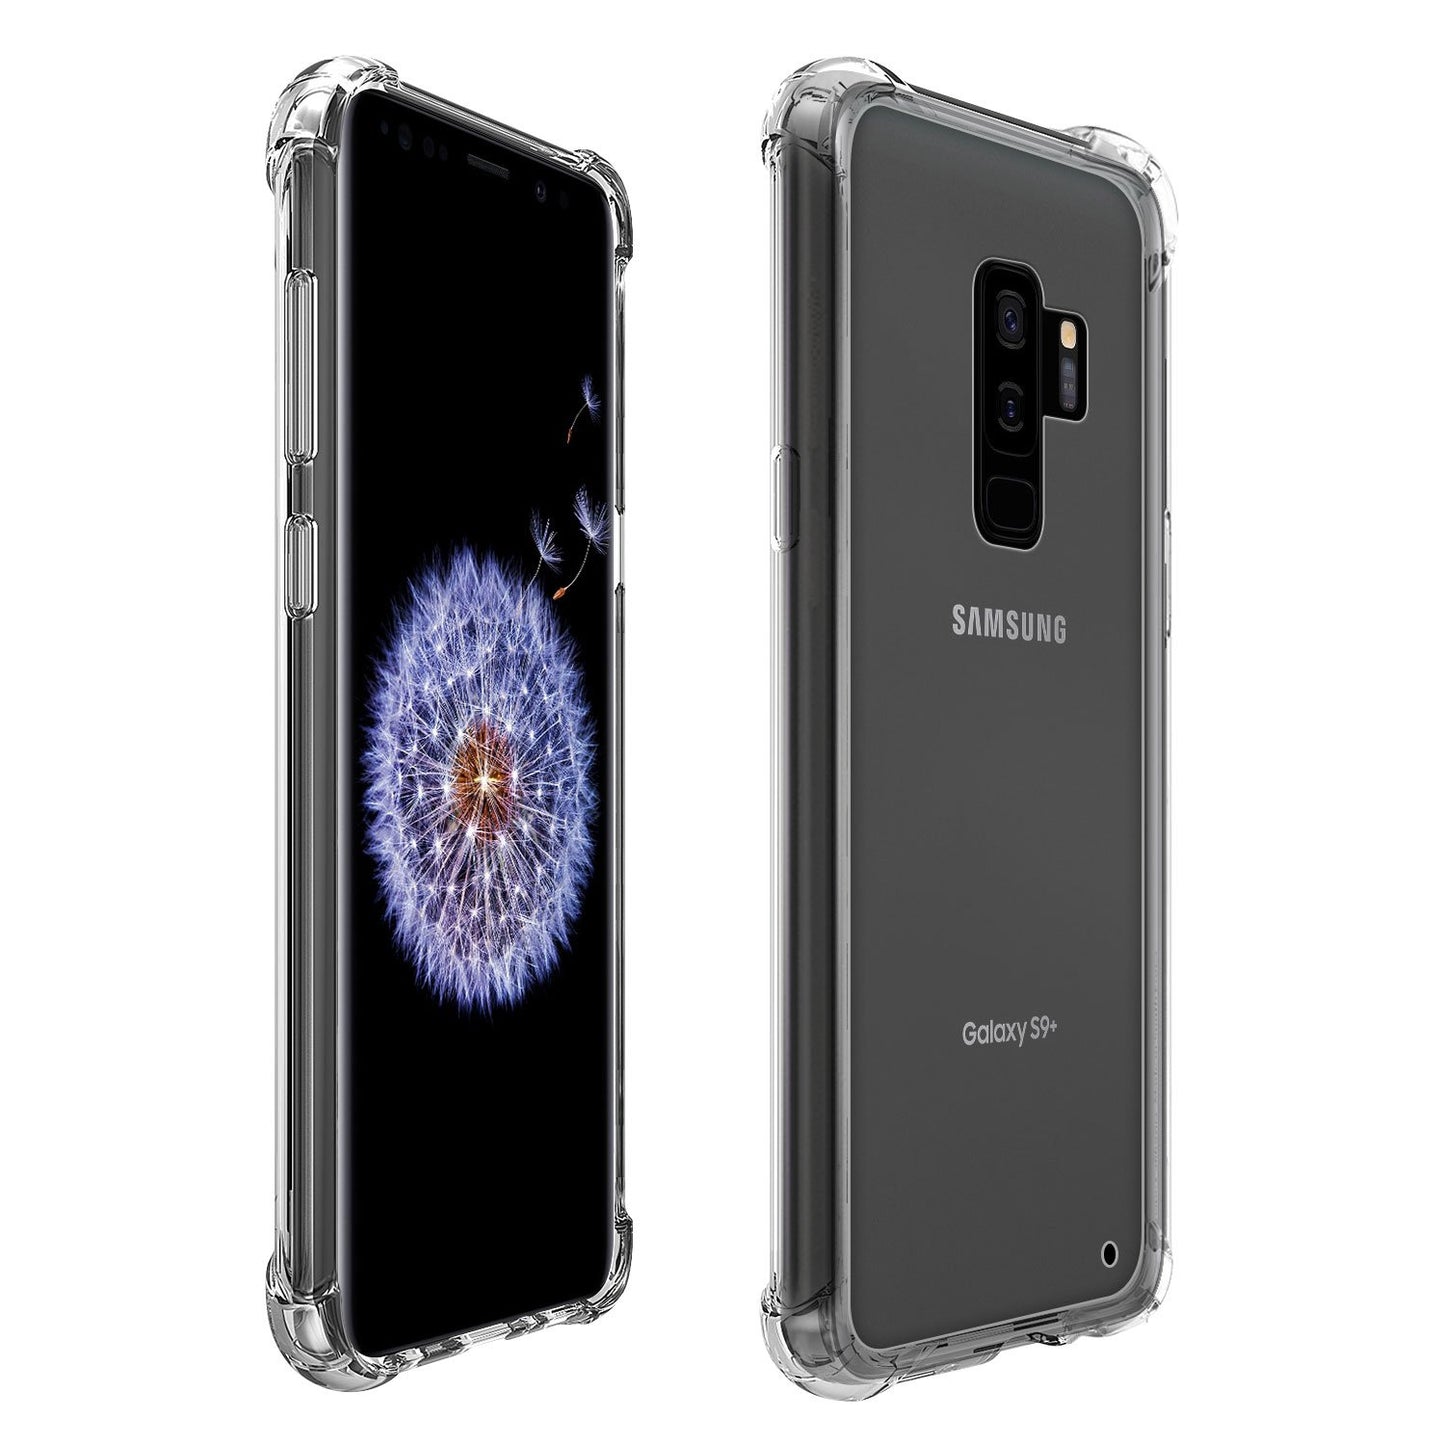 DDDSP9- Durable Clear Shockproof Slim Phone Case TPU Material - Galaxy S9 Plus